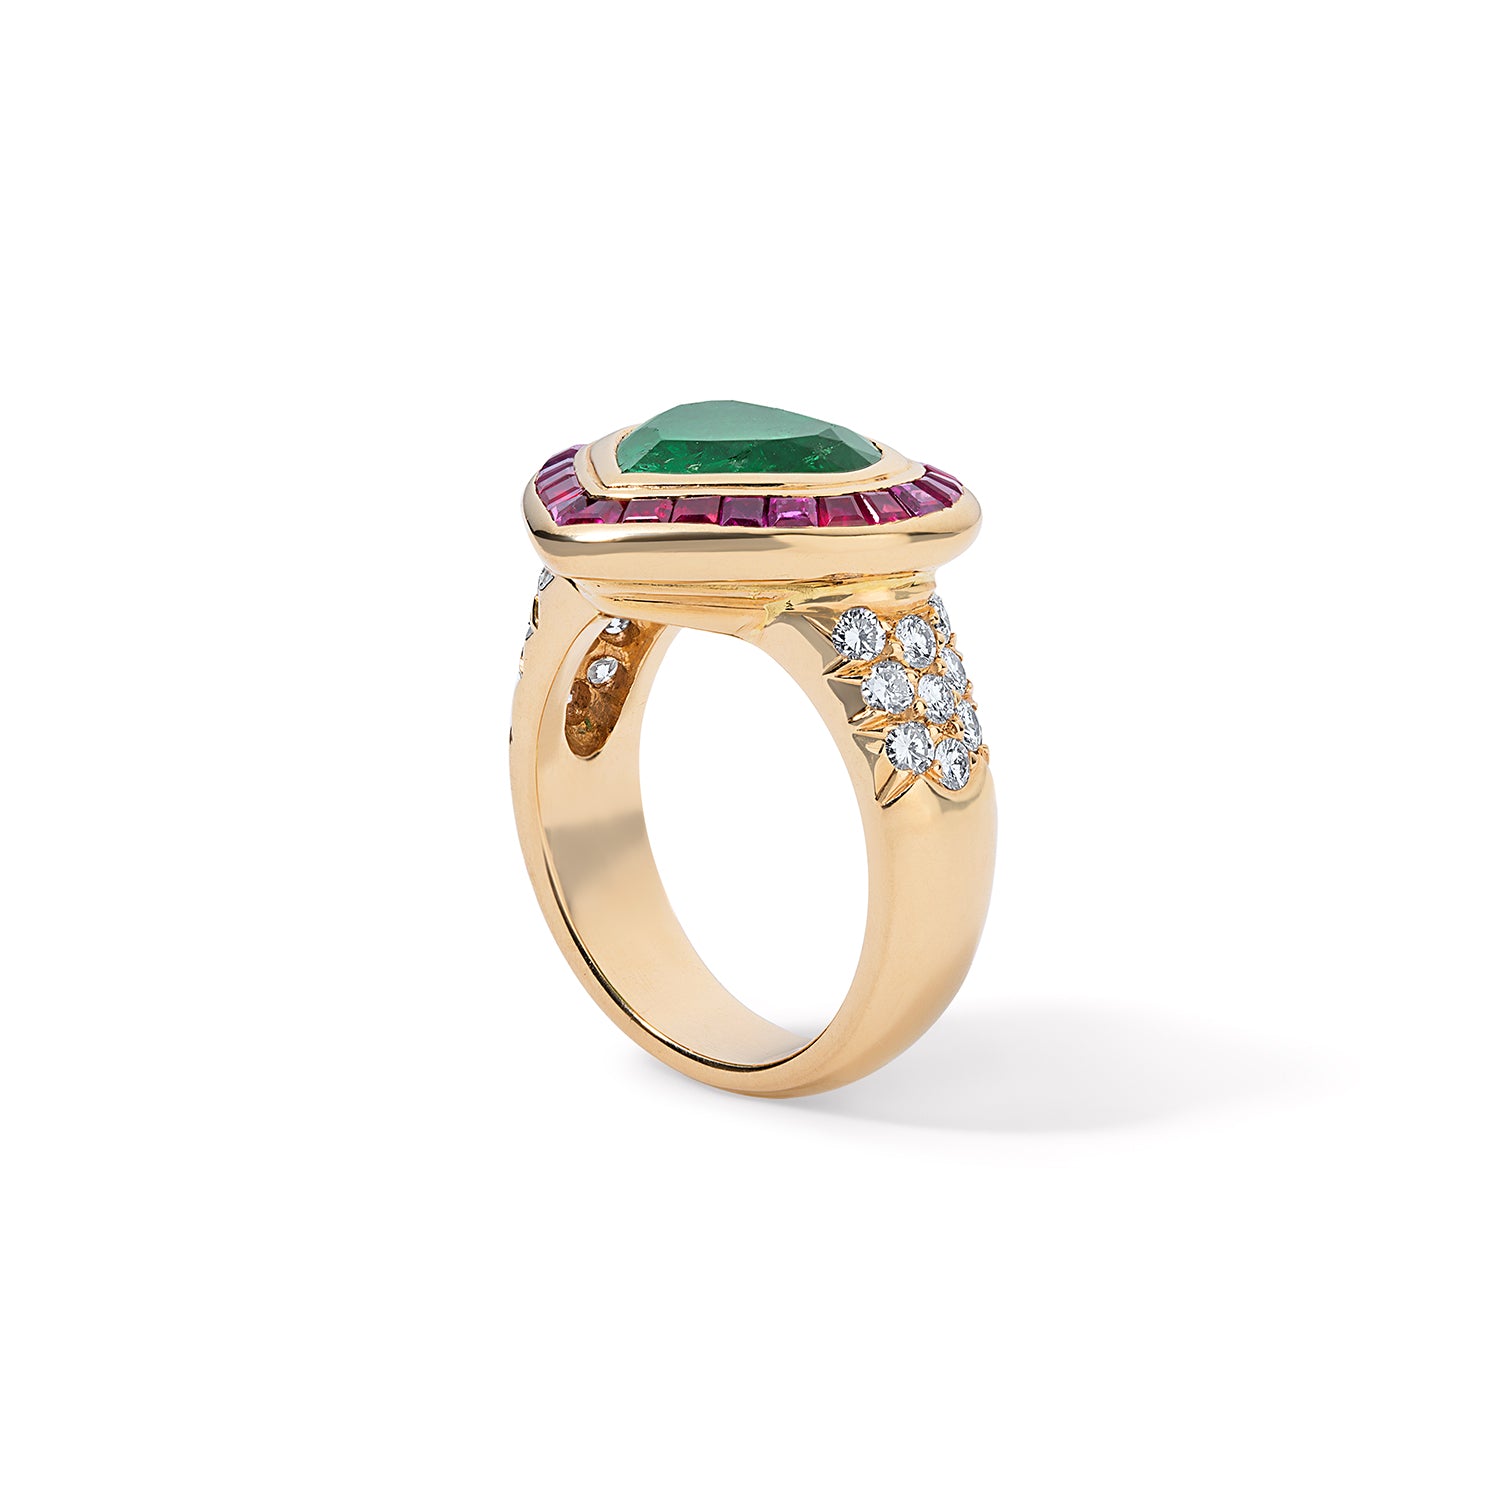 Vintage Heart Shaped Emerald with Ruby Baguettes and Diamond Ring